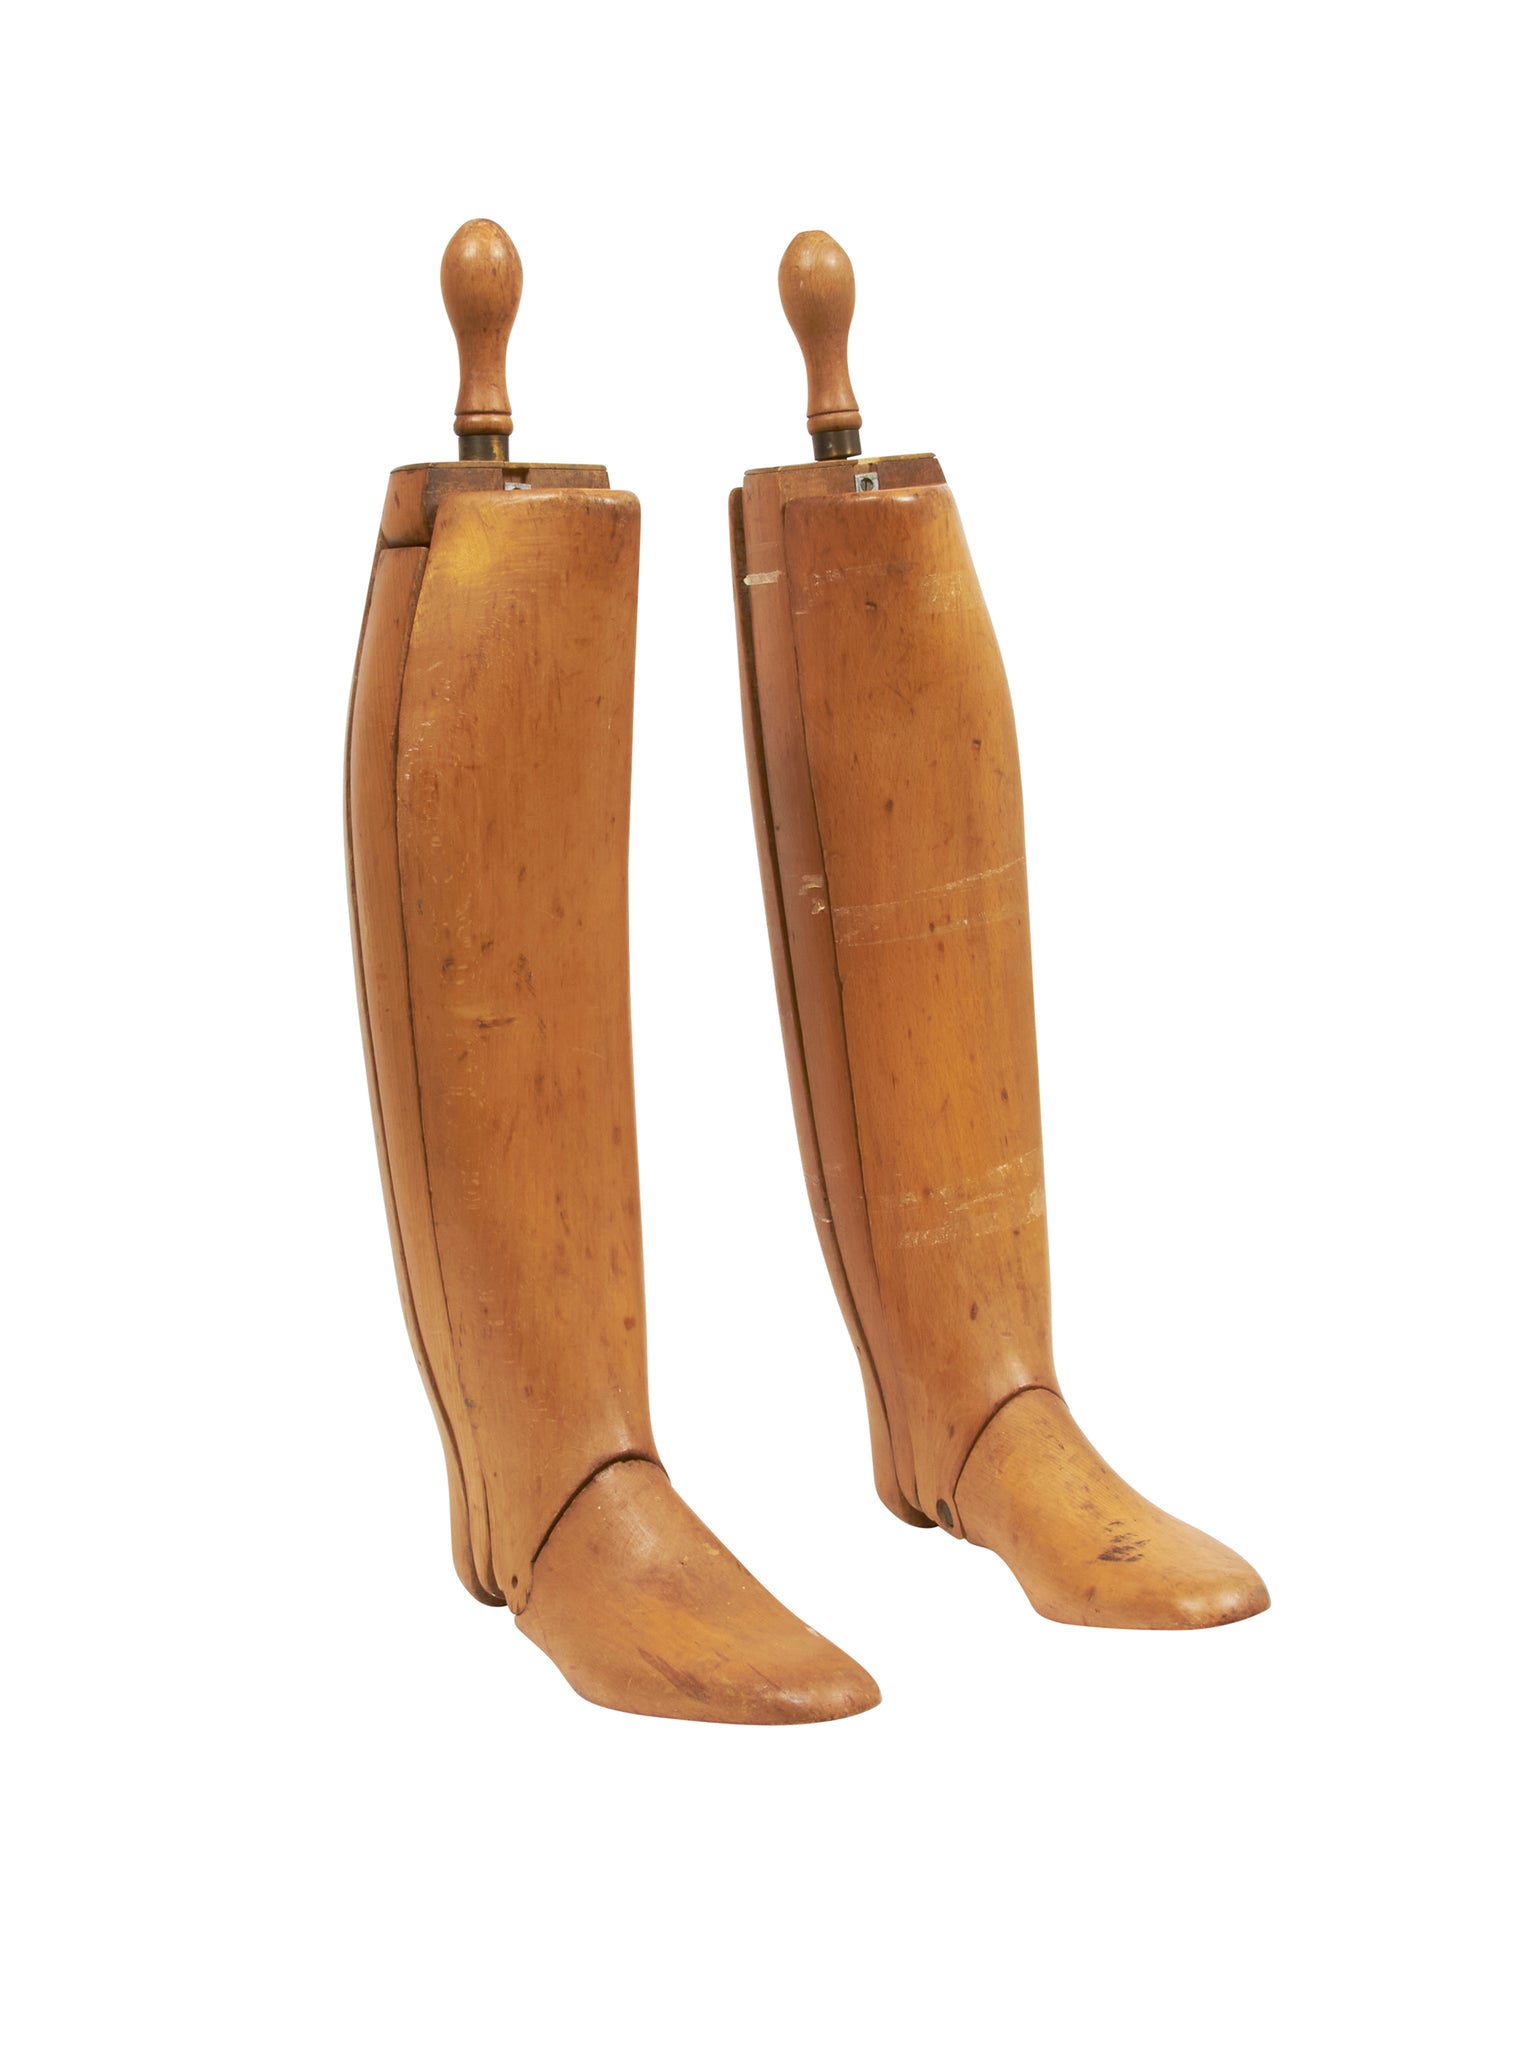 Vintage 1920s English Riding Boot Forms Weston Table